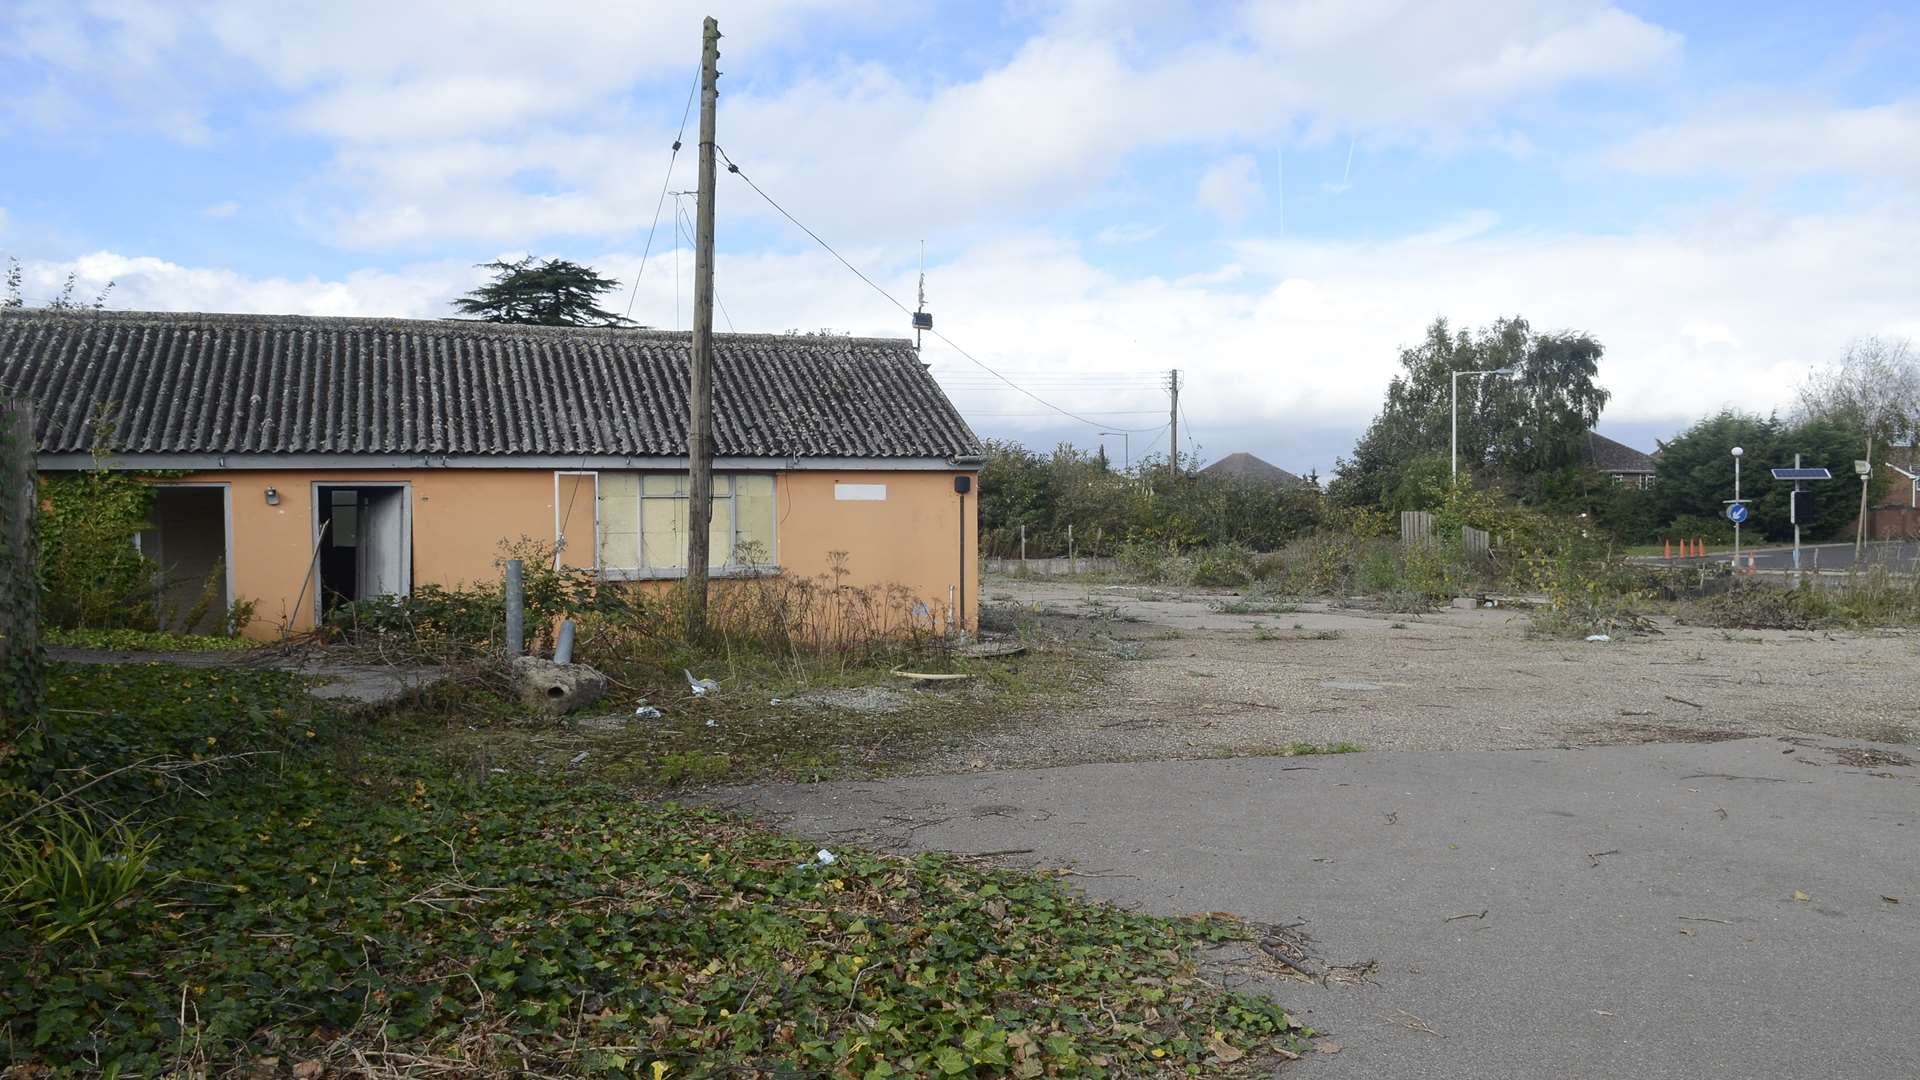 The empty site on the corner of Canterbury Road and Selling Road where the pub is planned